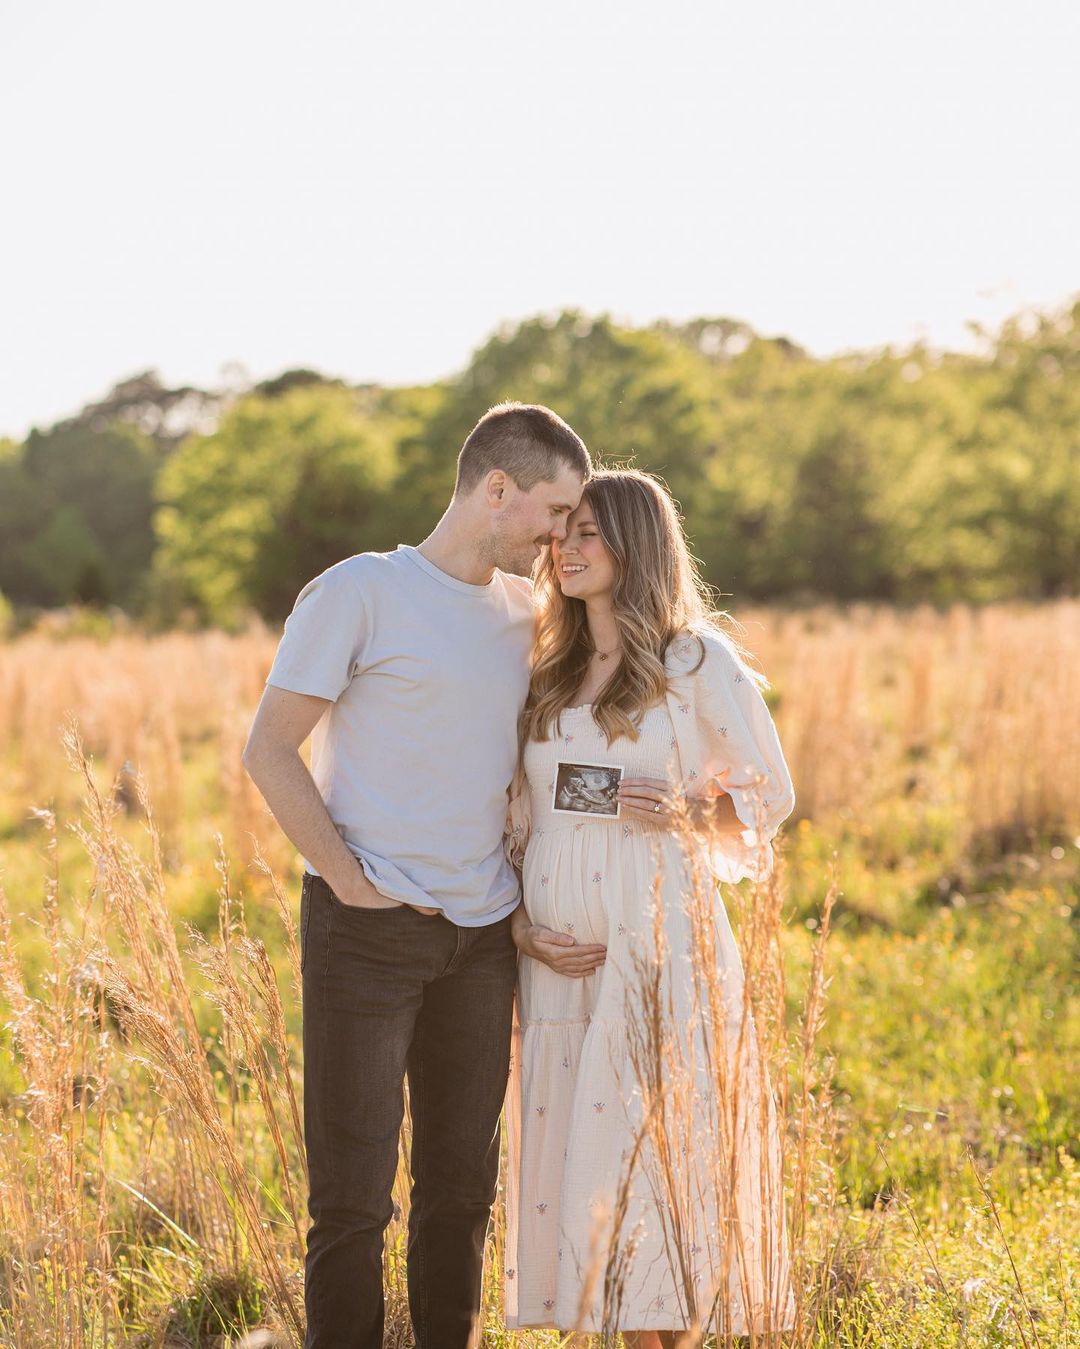 trent harmon and his wife kathleen when she was pregnant